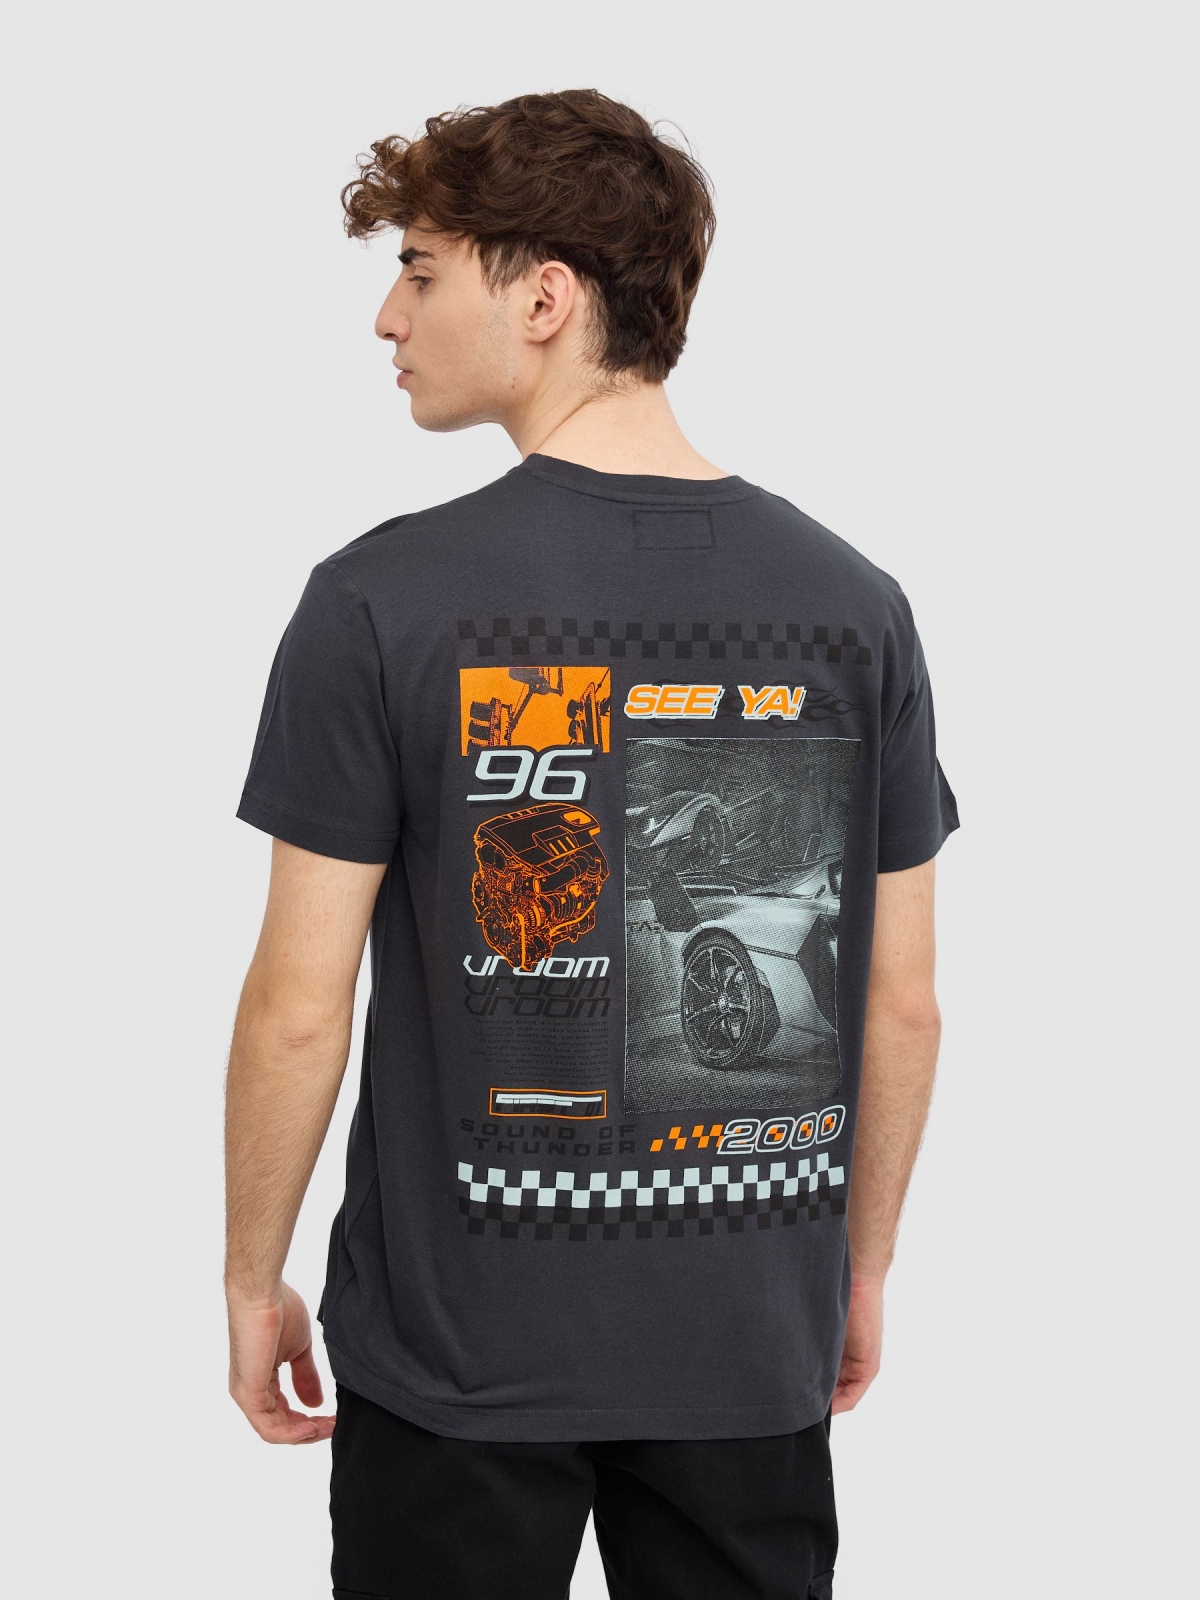 Racing T-shirt dark grey middle back view